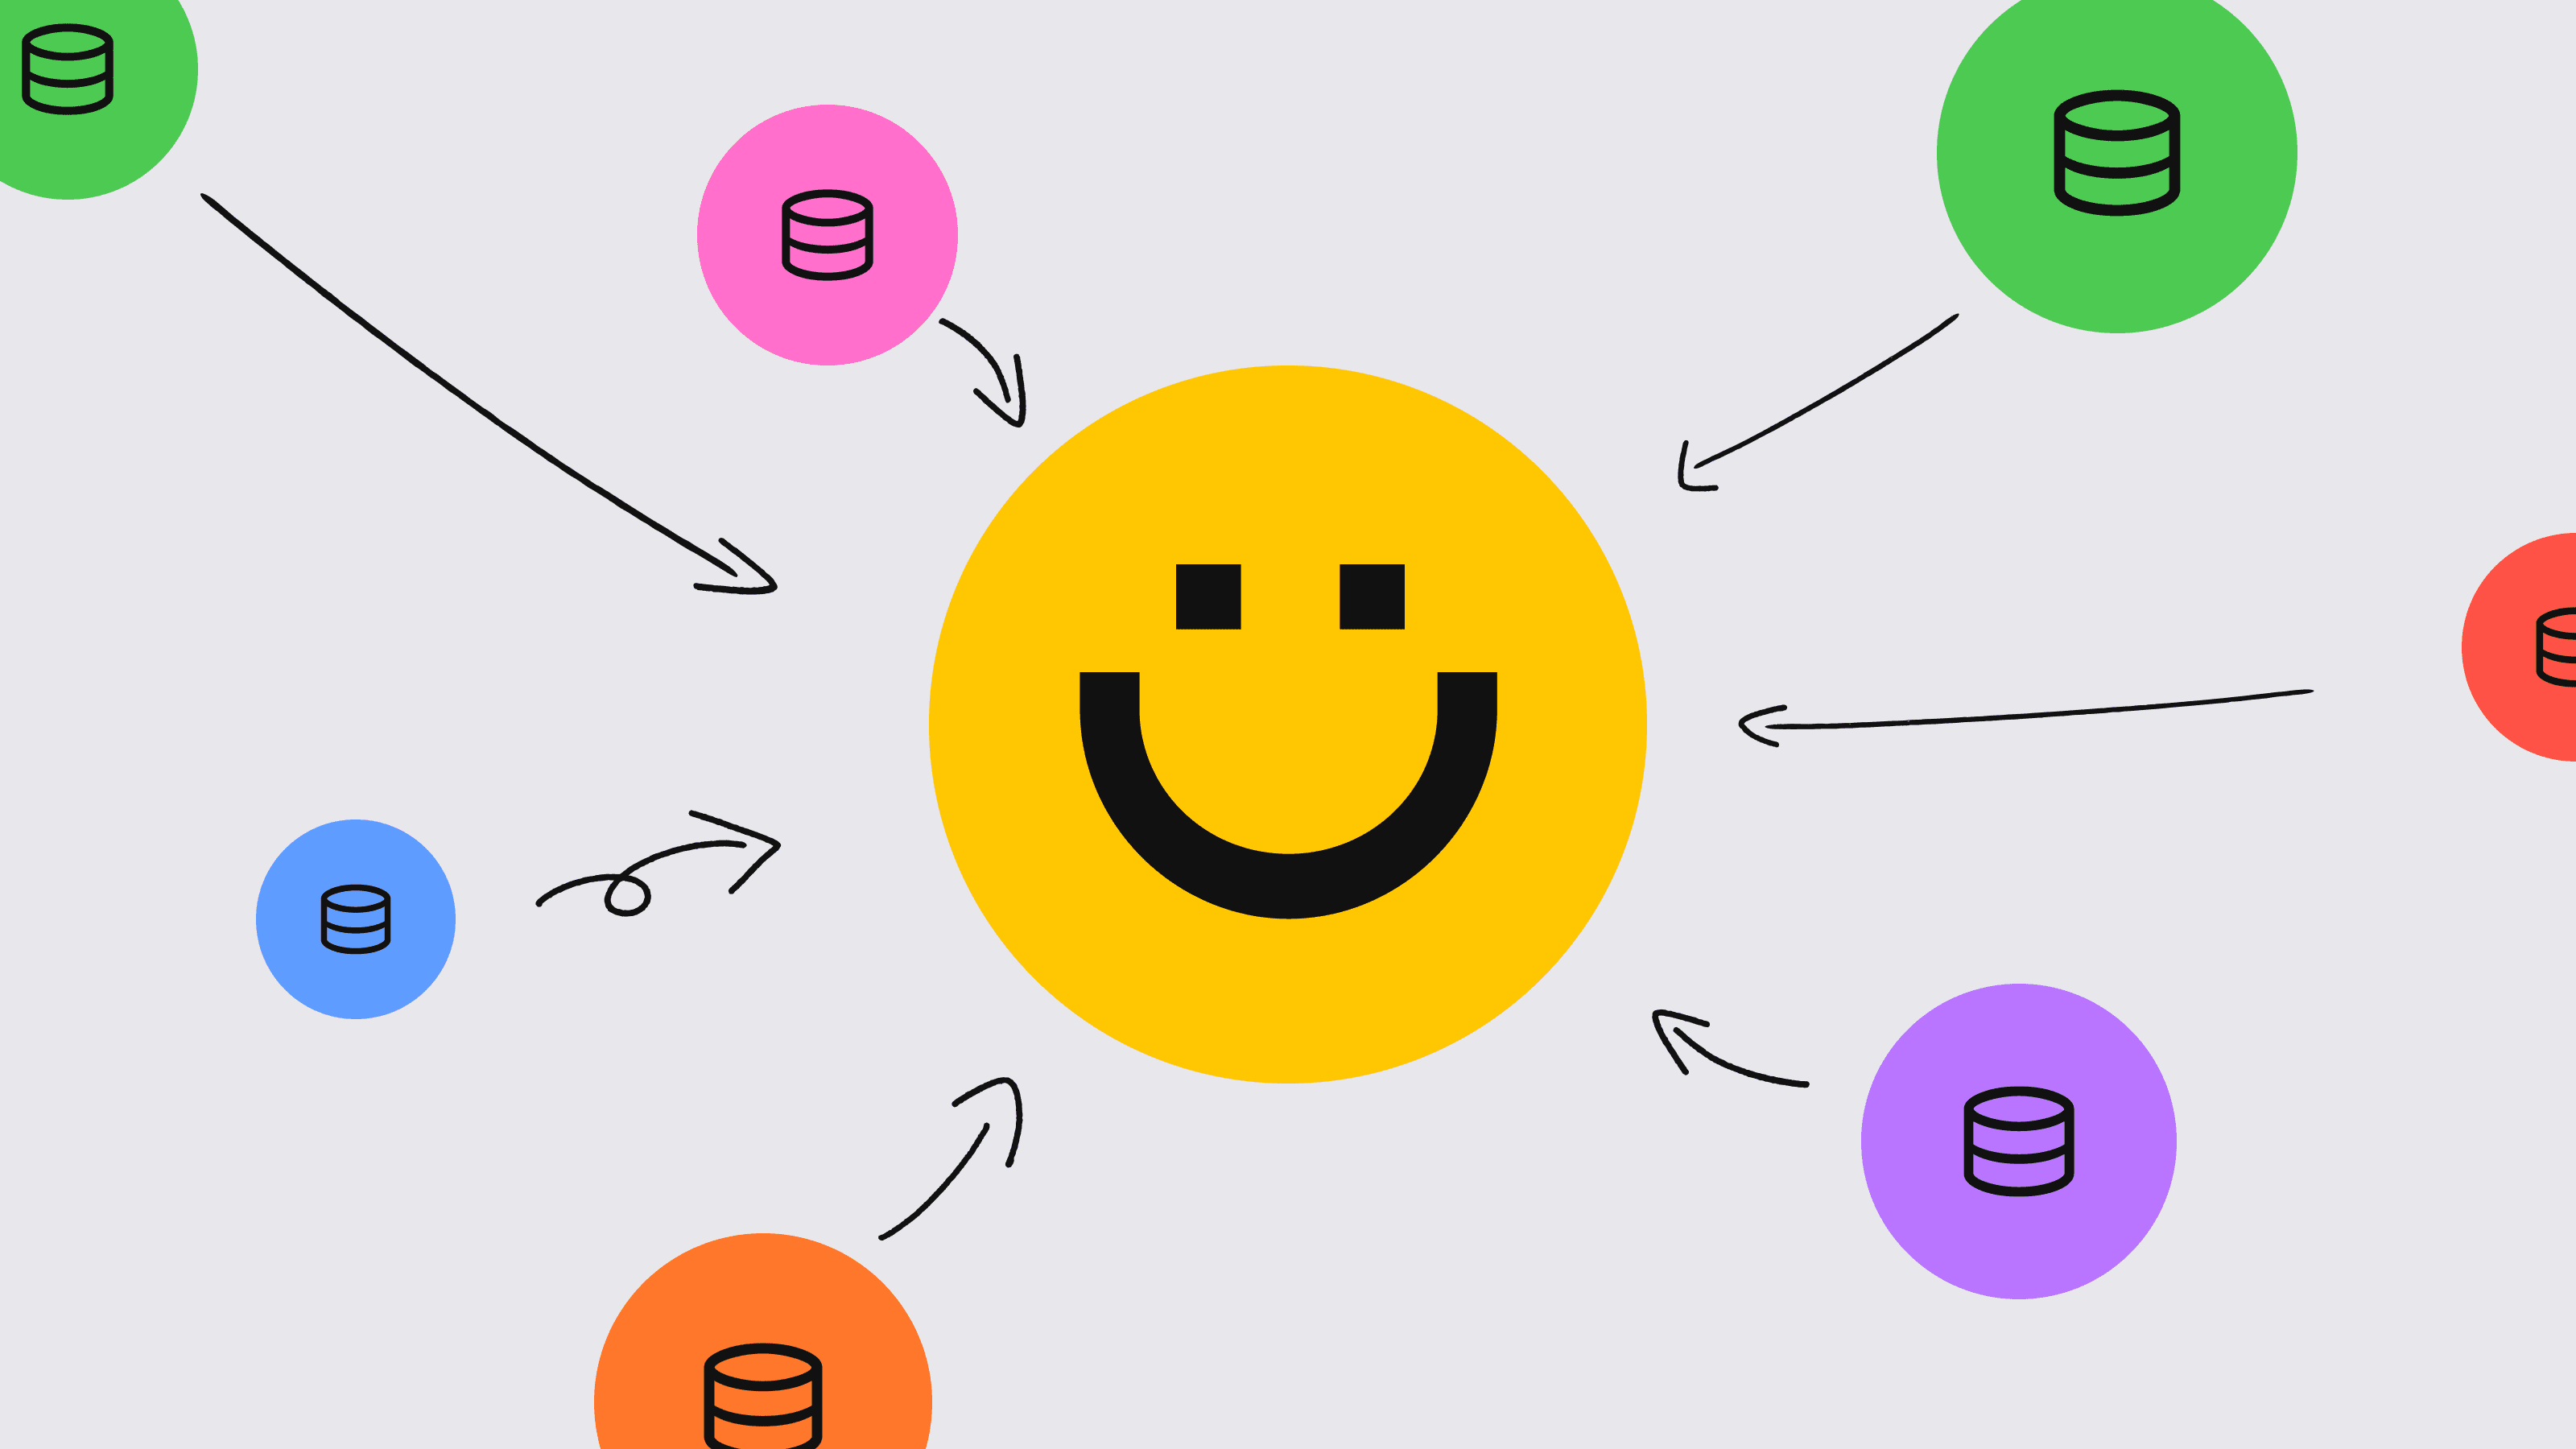 Database icons of various sizes and colors surround the Dandi smiley, each with an arrow pointing to the central logo.